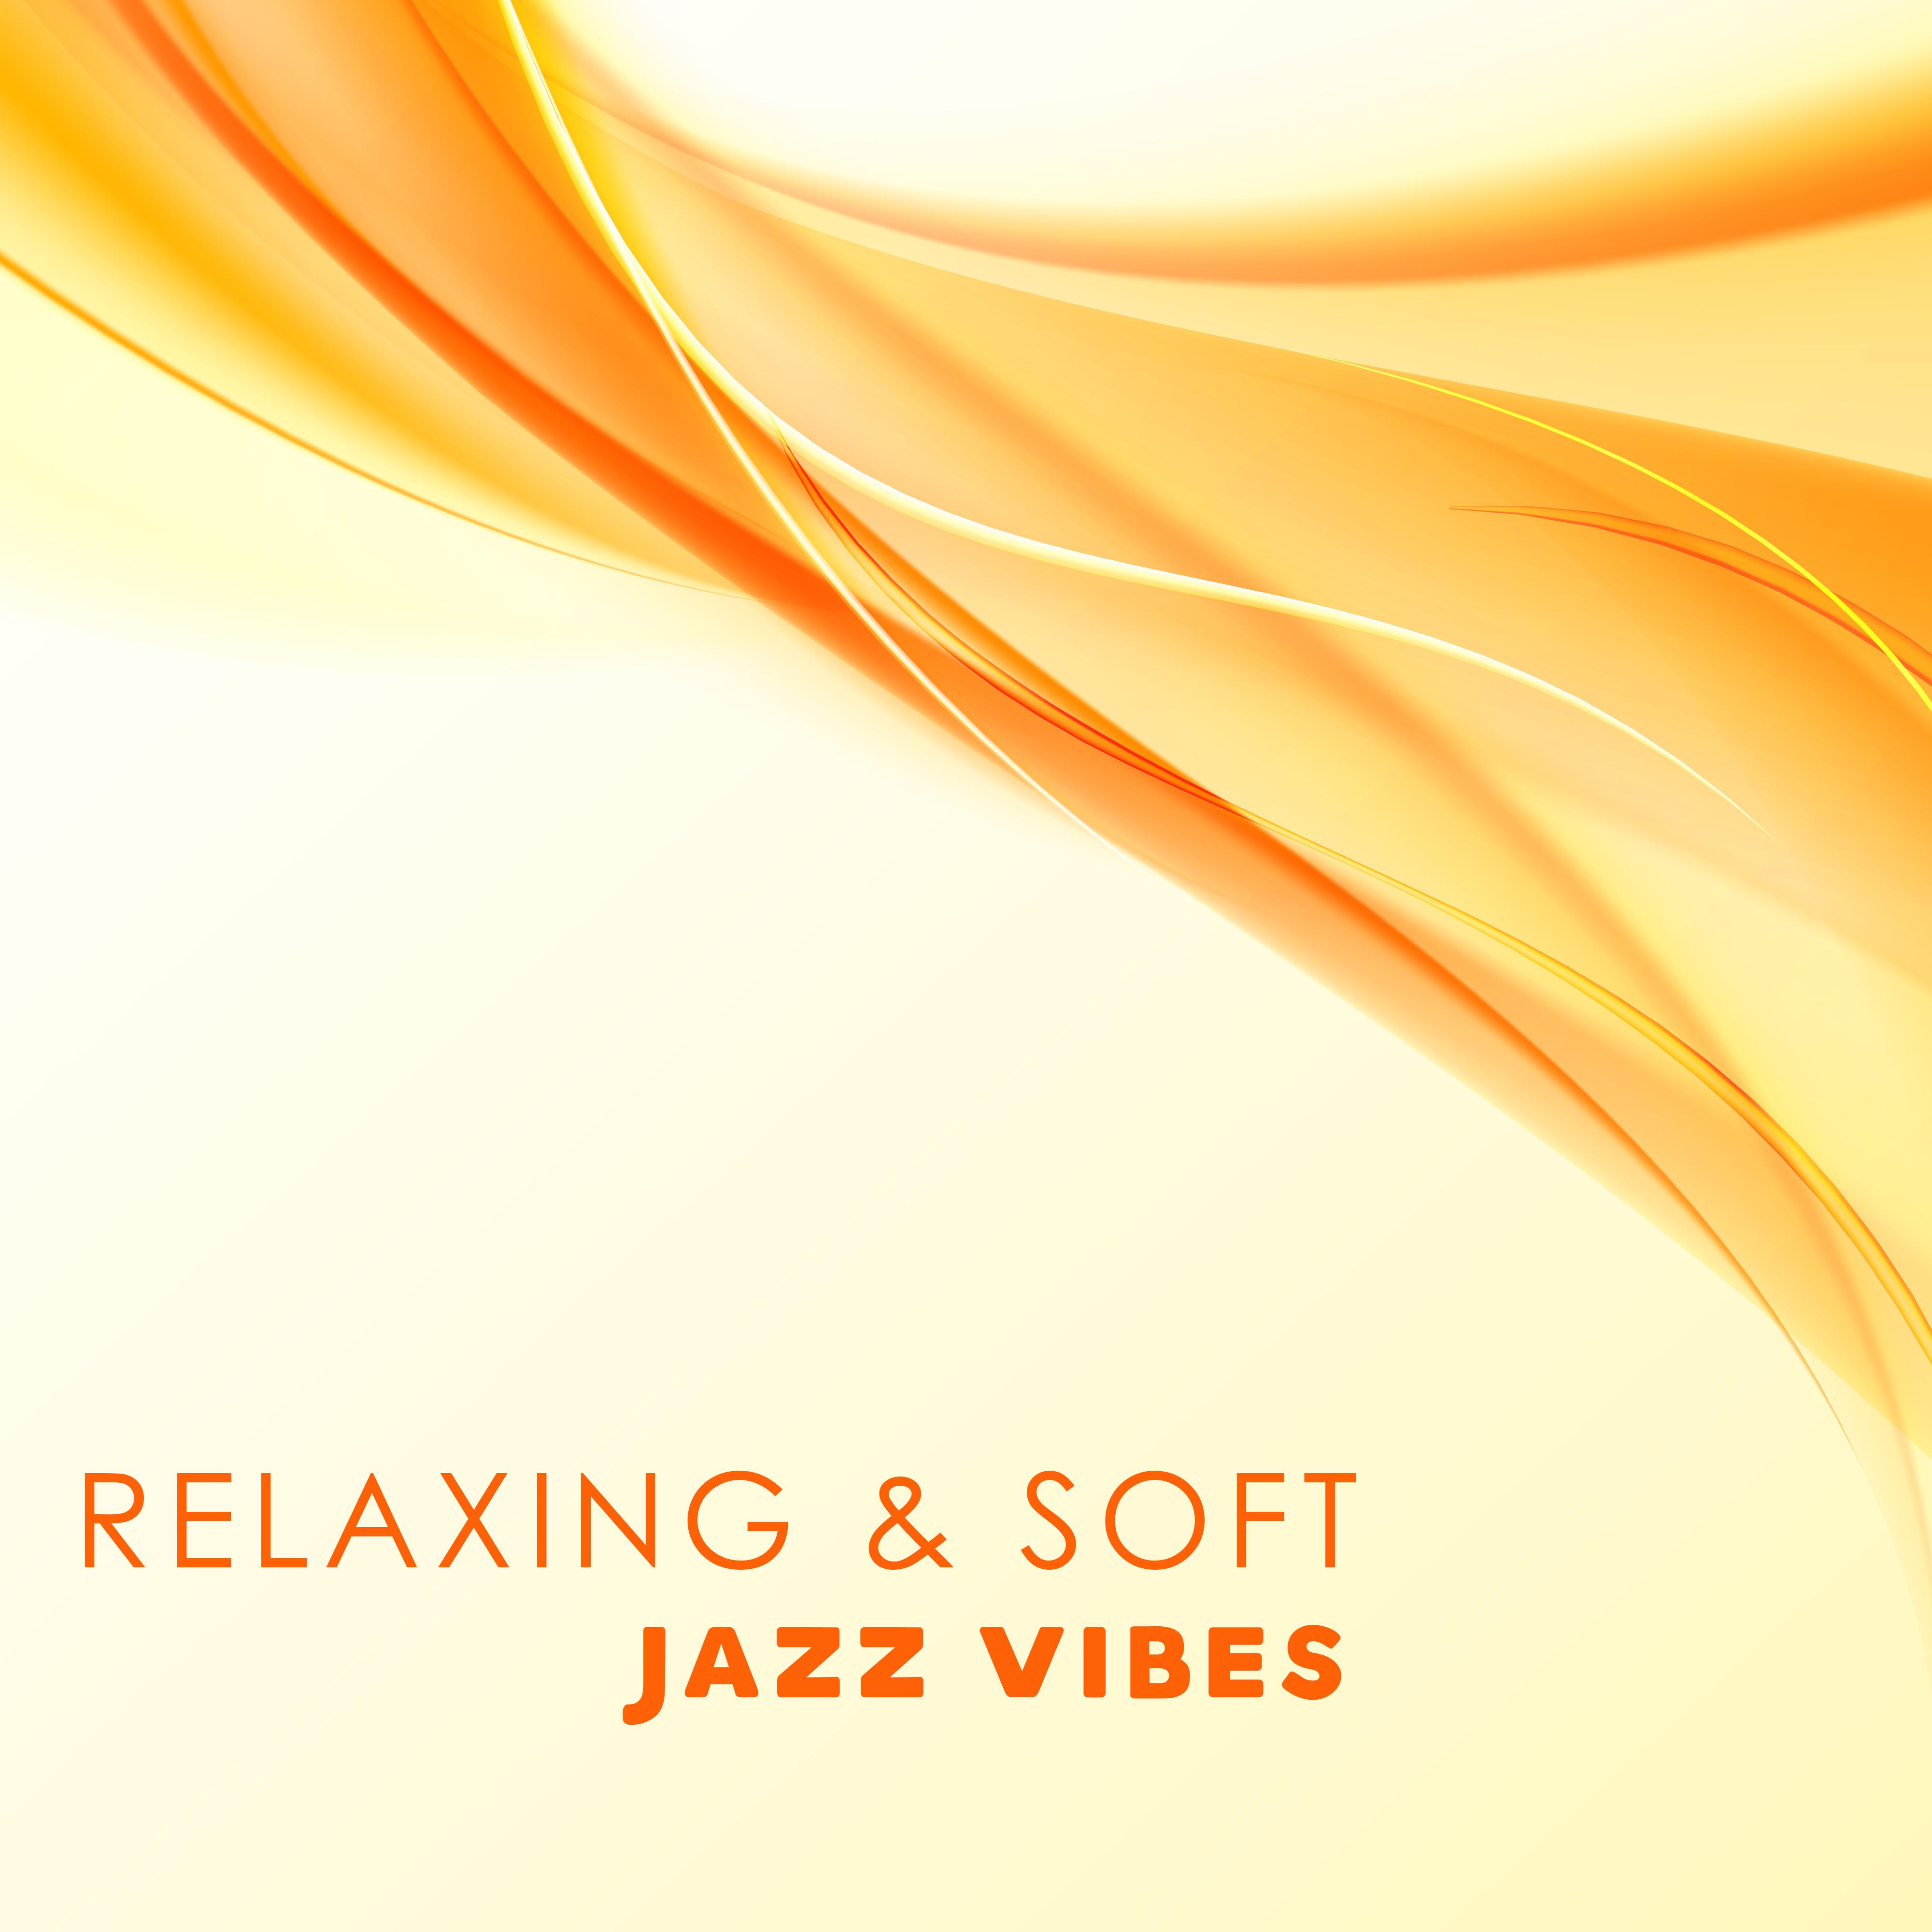 Relaxing & Soft Jazz Vibes